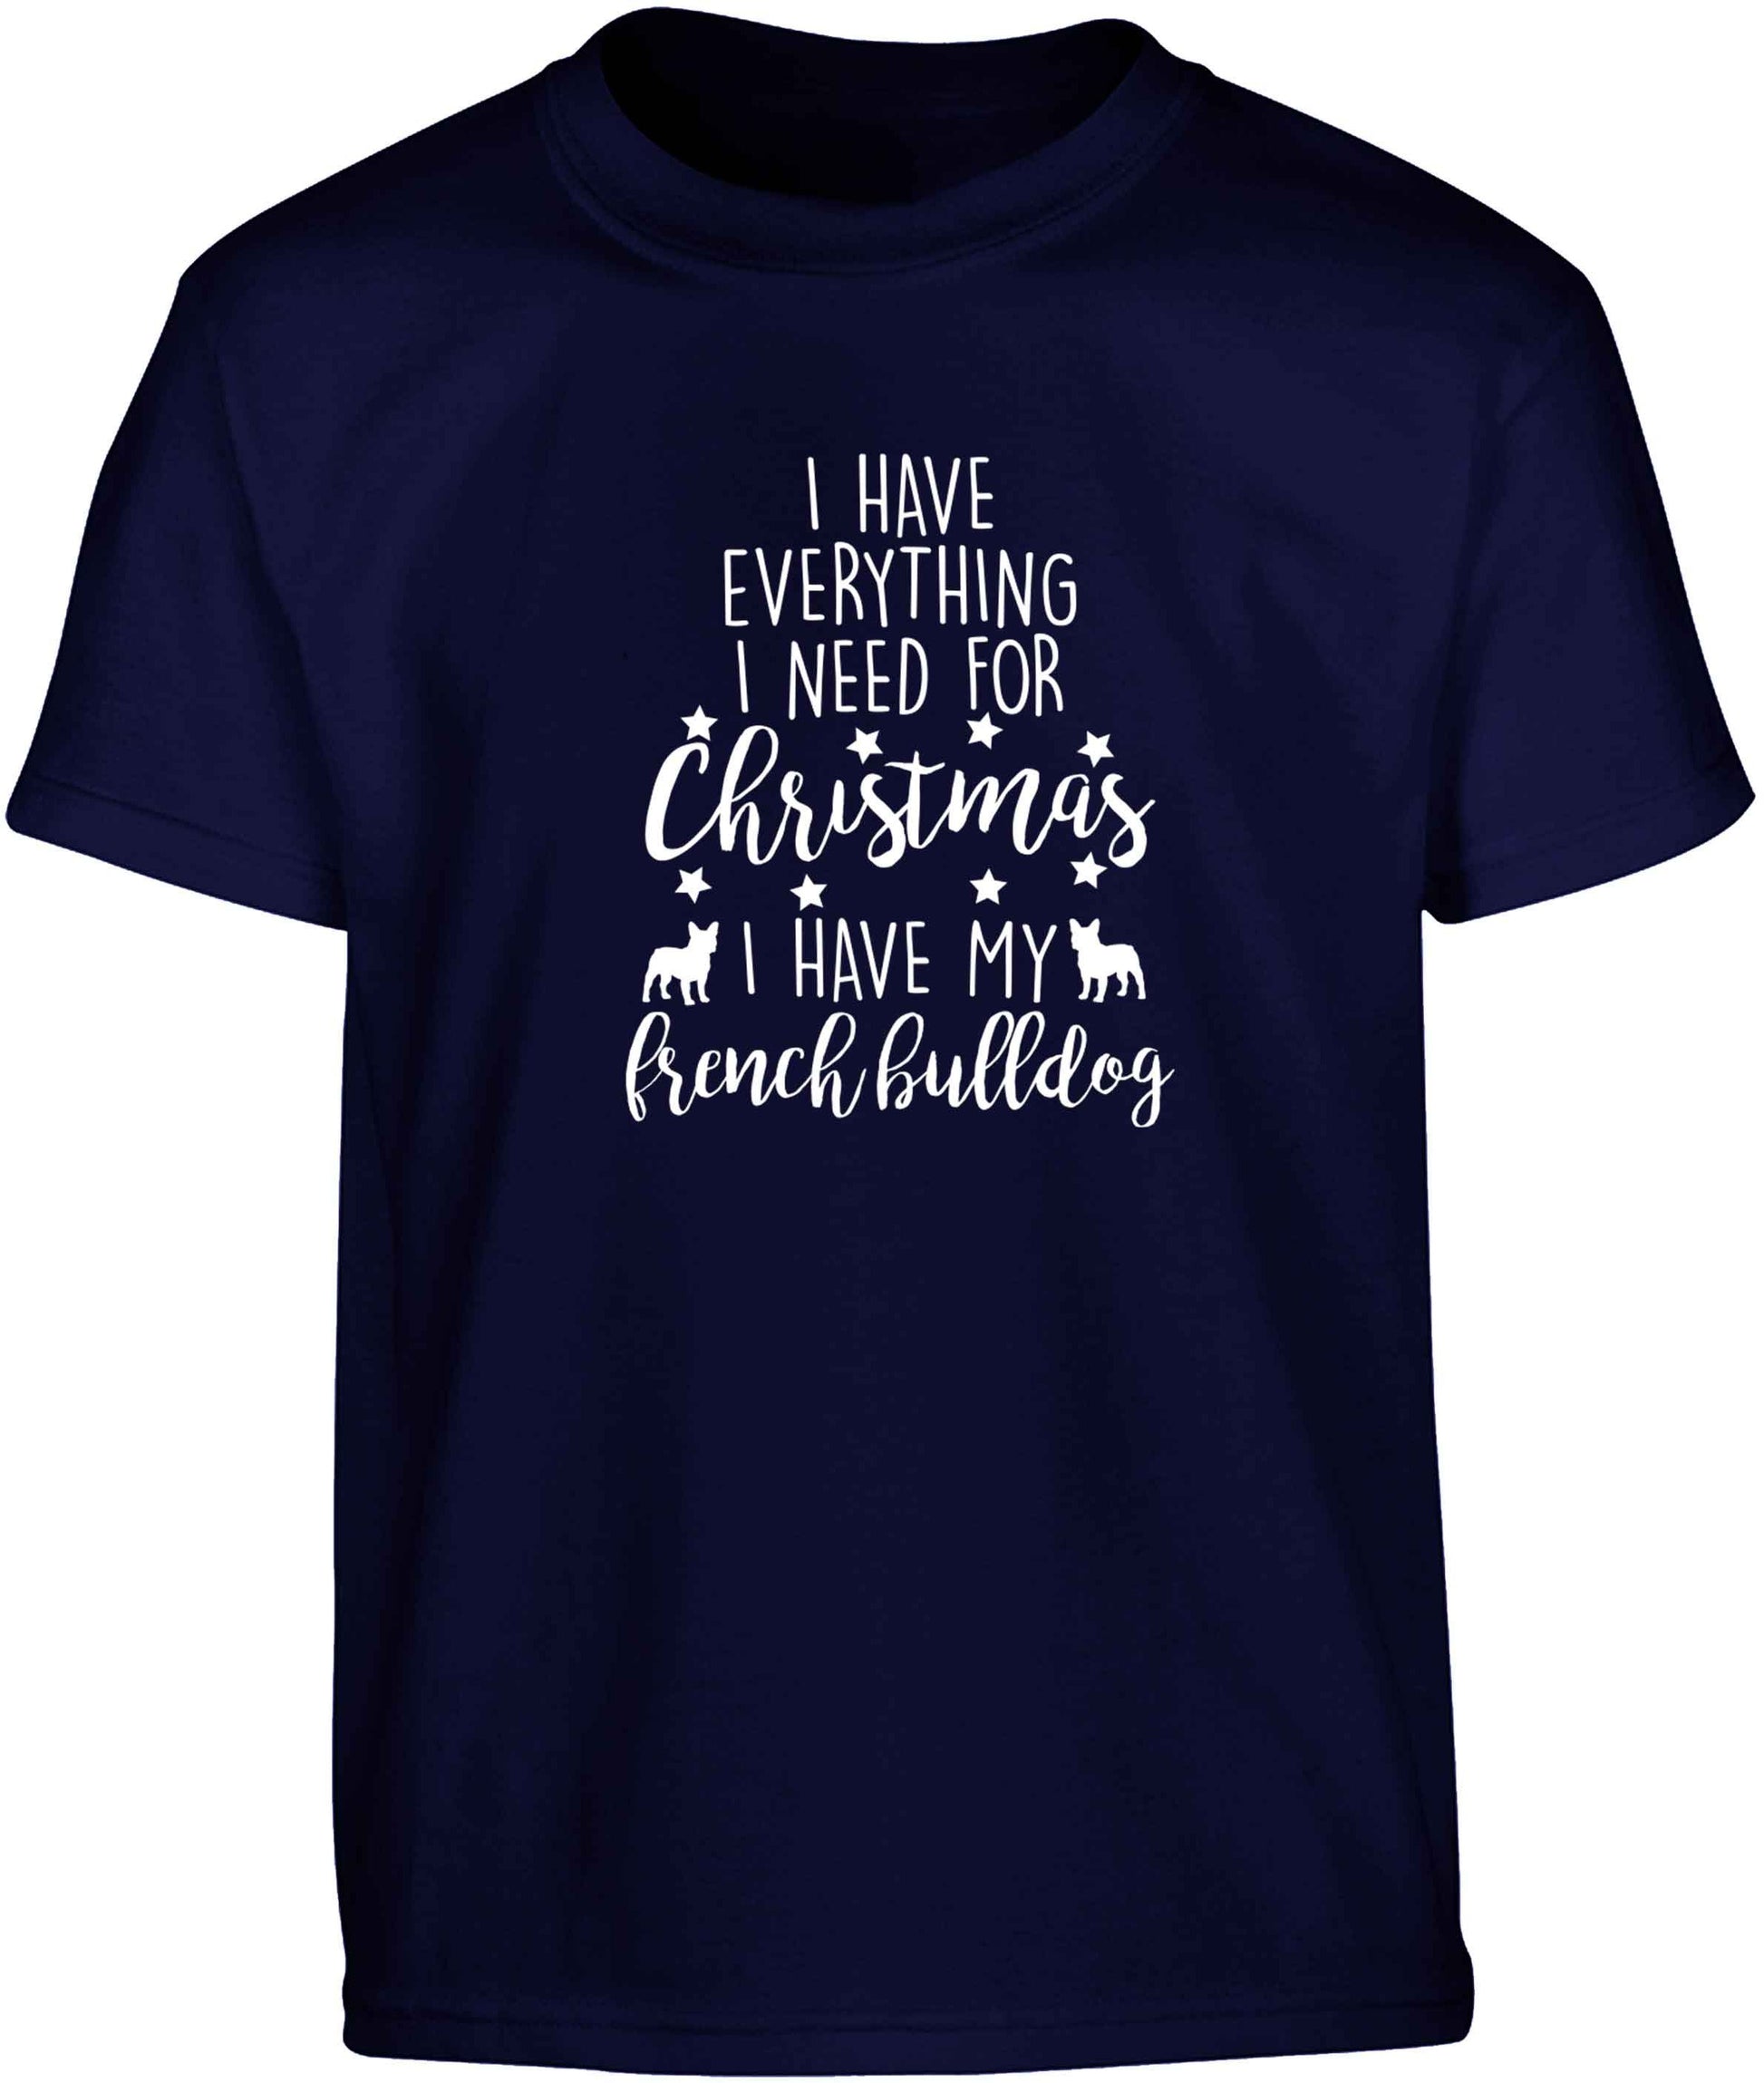 I have everything I need for Christmas I have my french bulldog Children's navy Tshirt 12-13 Years